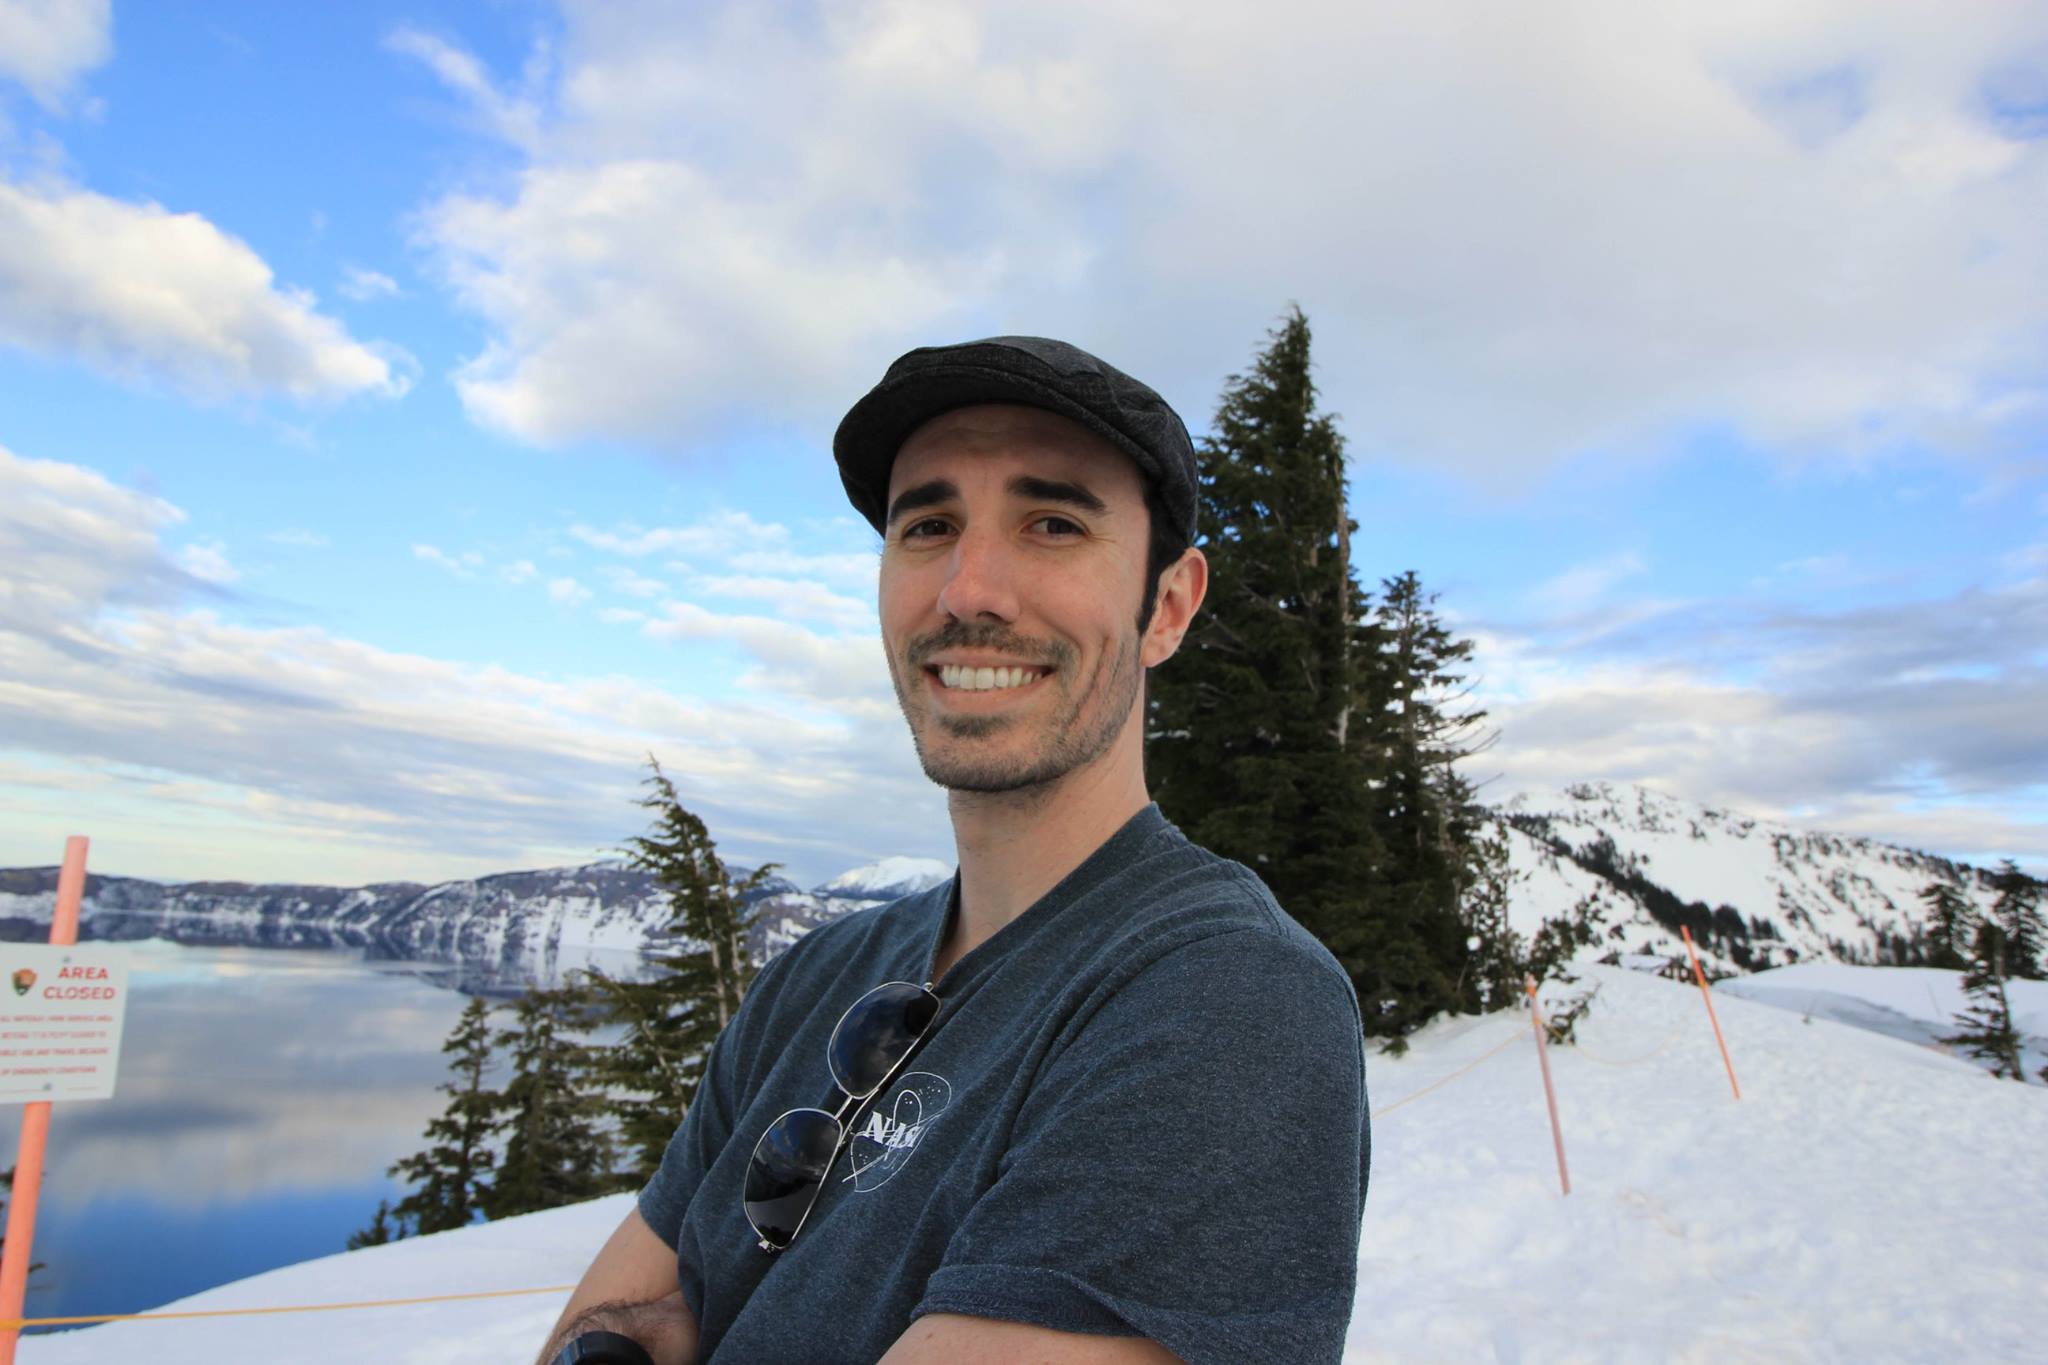 Prof. Brandon Saller stands in front of snow-covered mountains